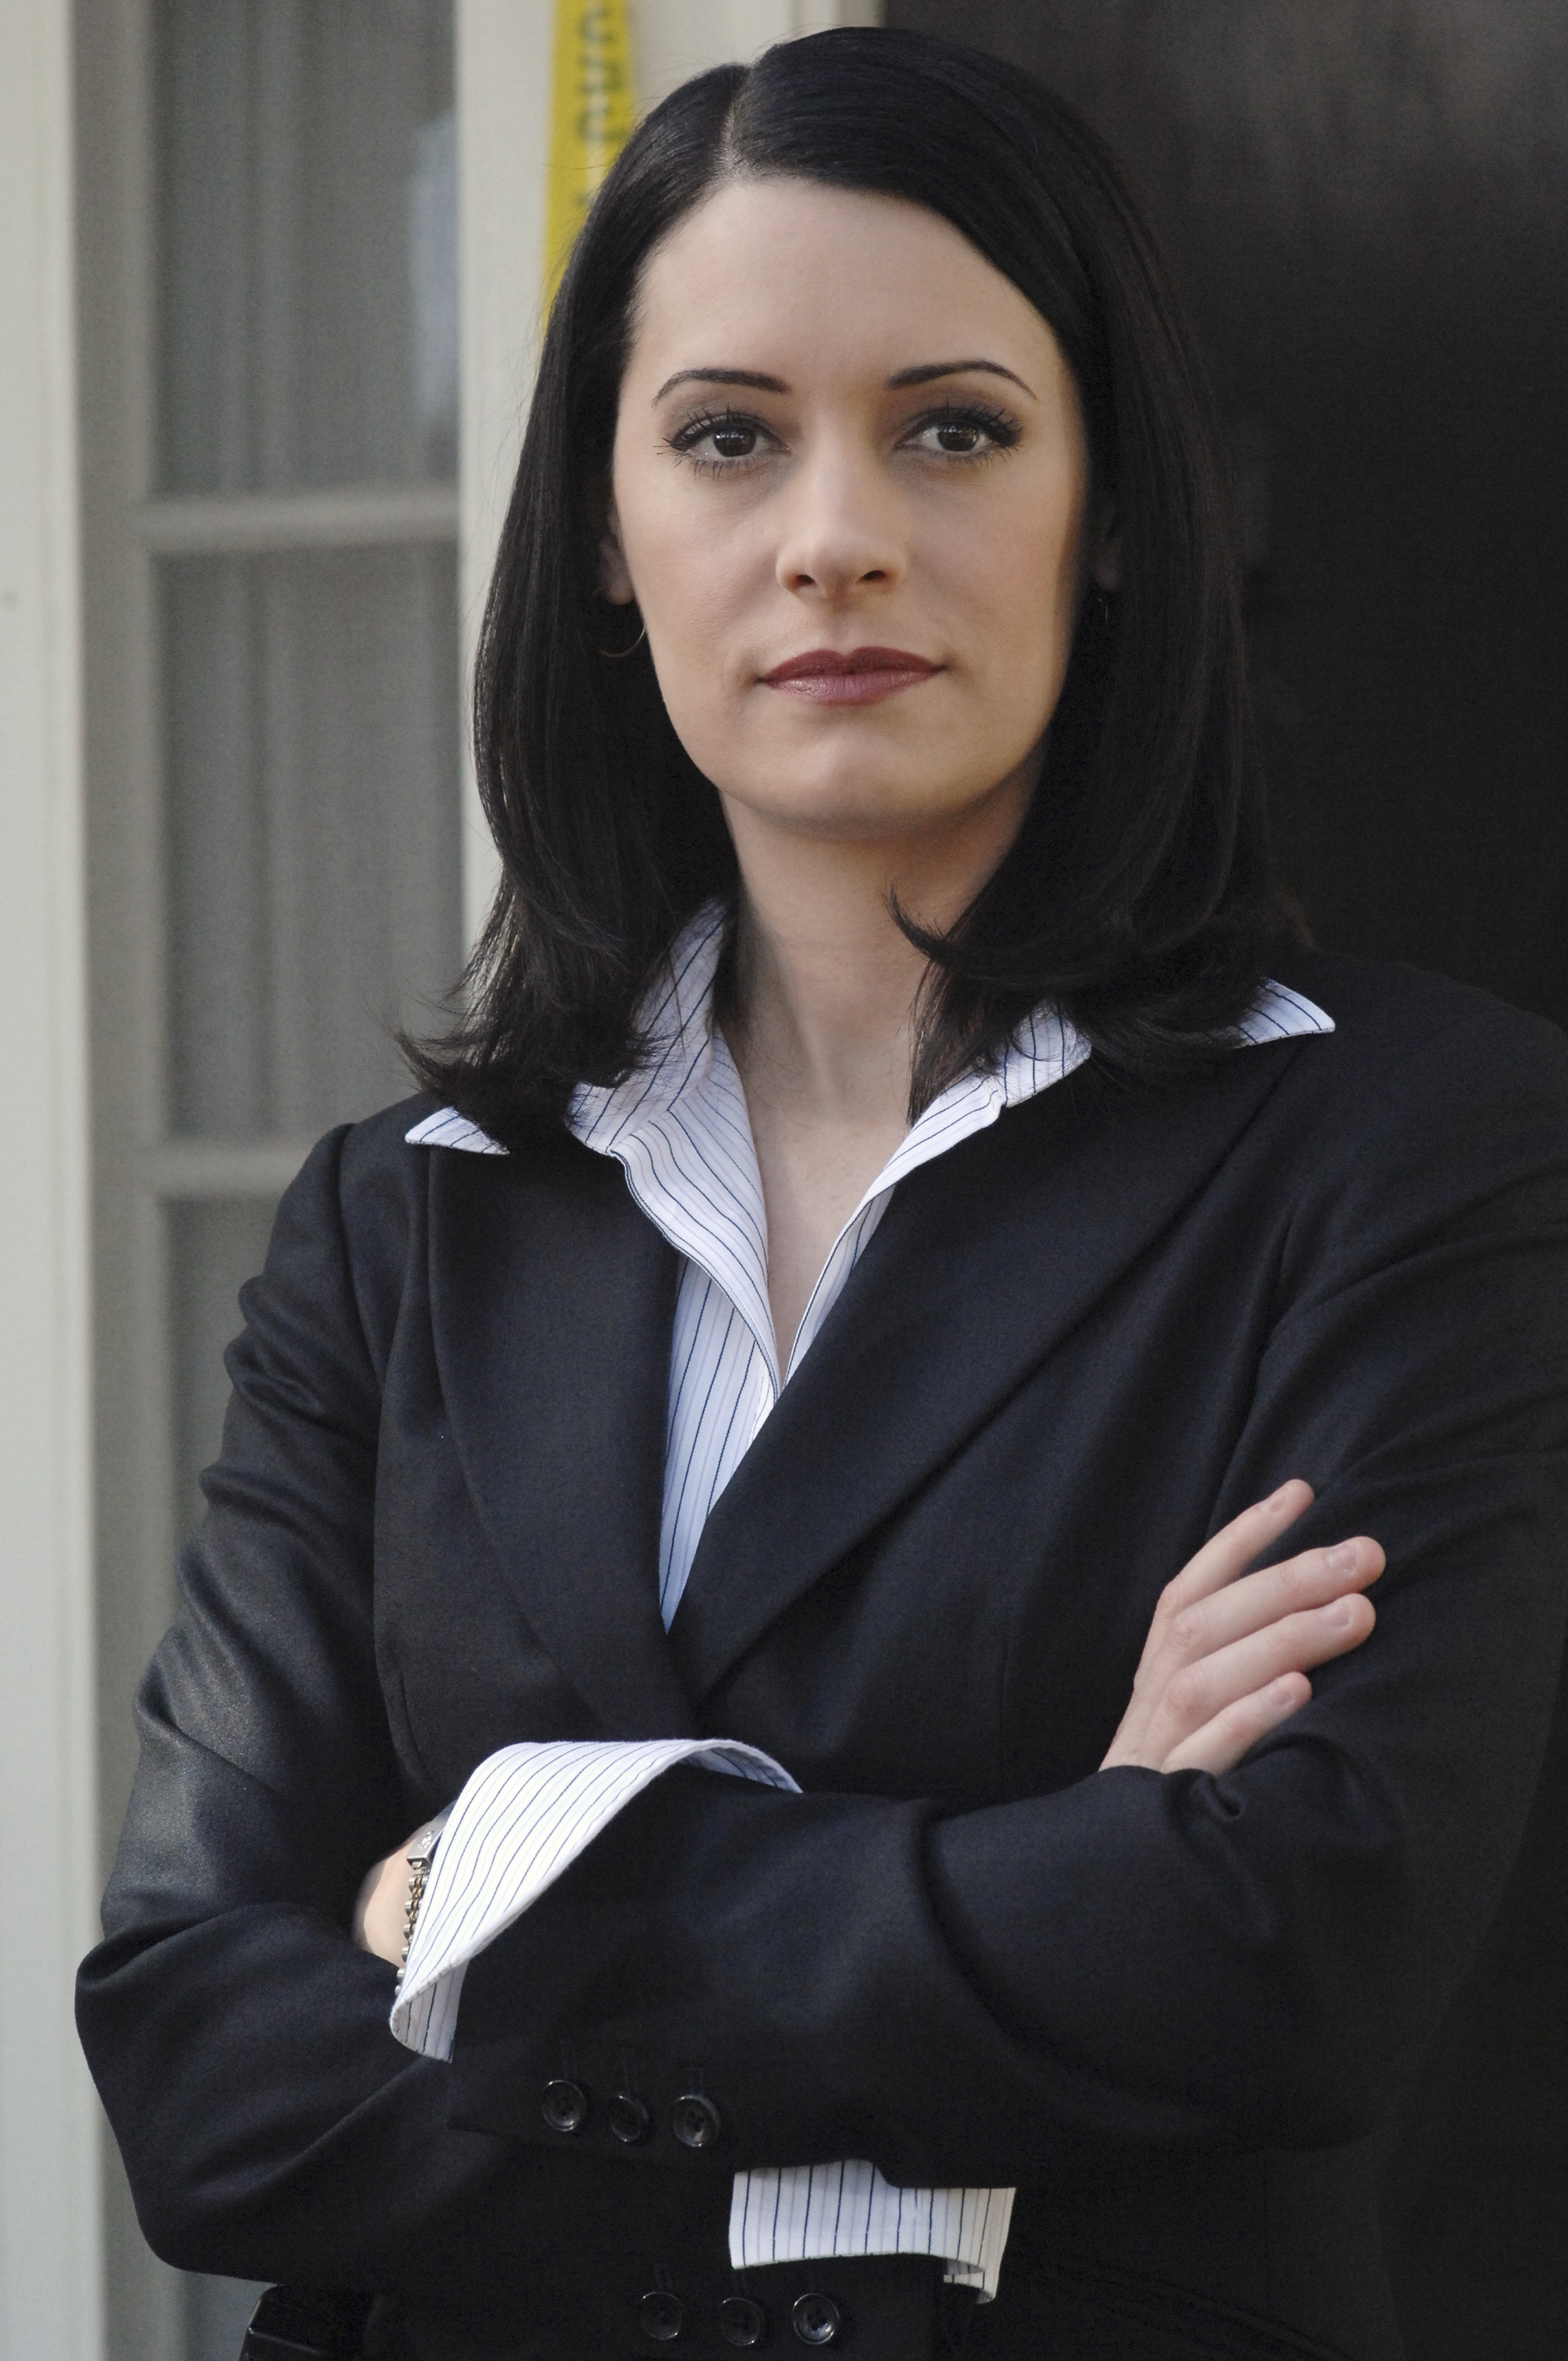 Paget brewster hot pictures